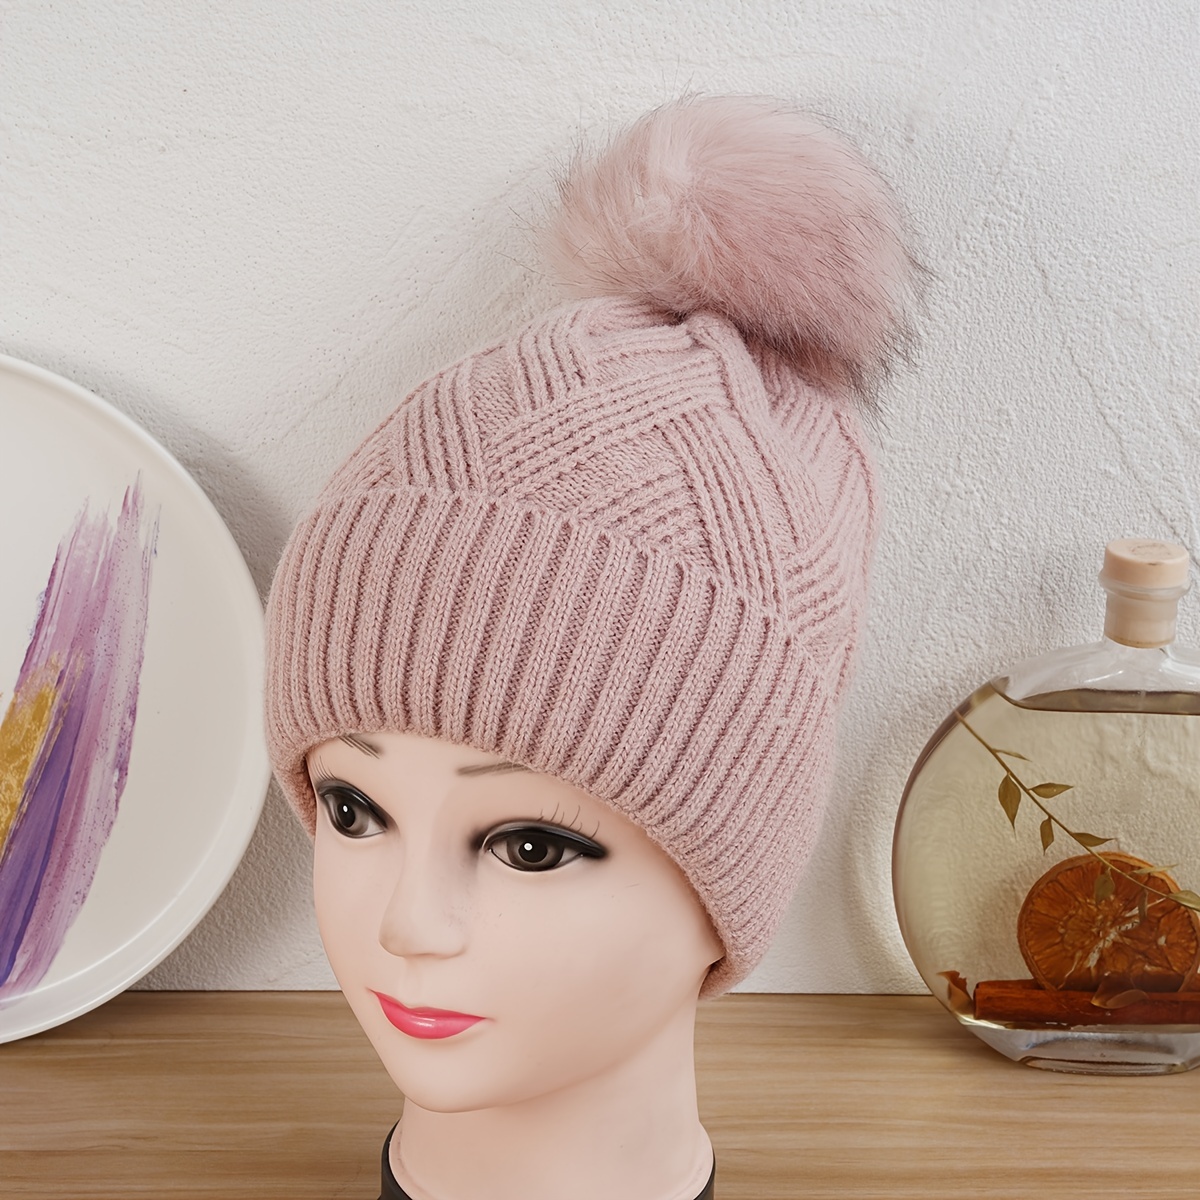 How to Make a Lazy Pompom and Attach it to a Hat - 10 rows a day